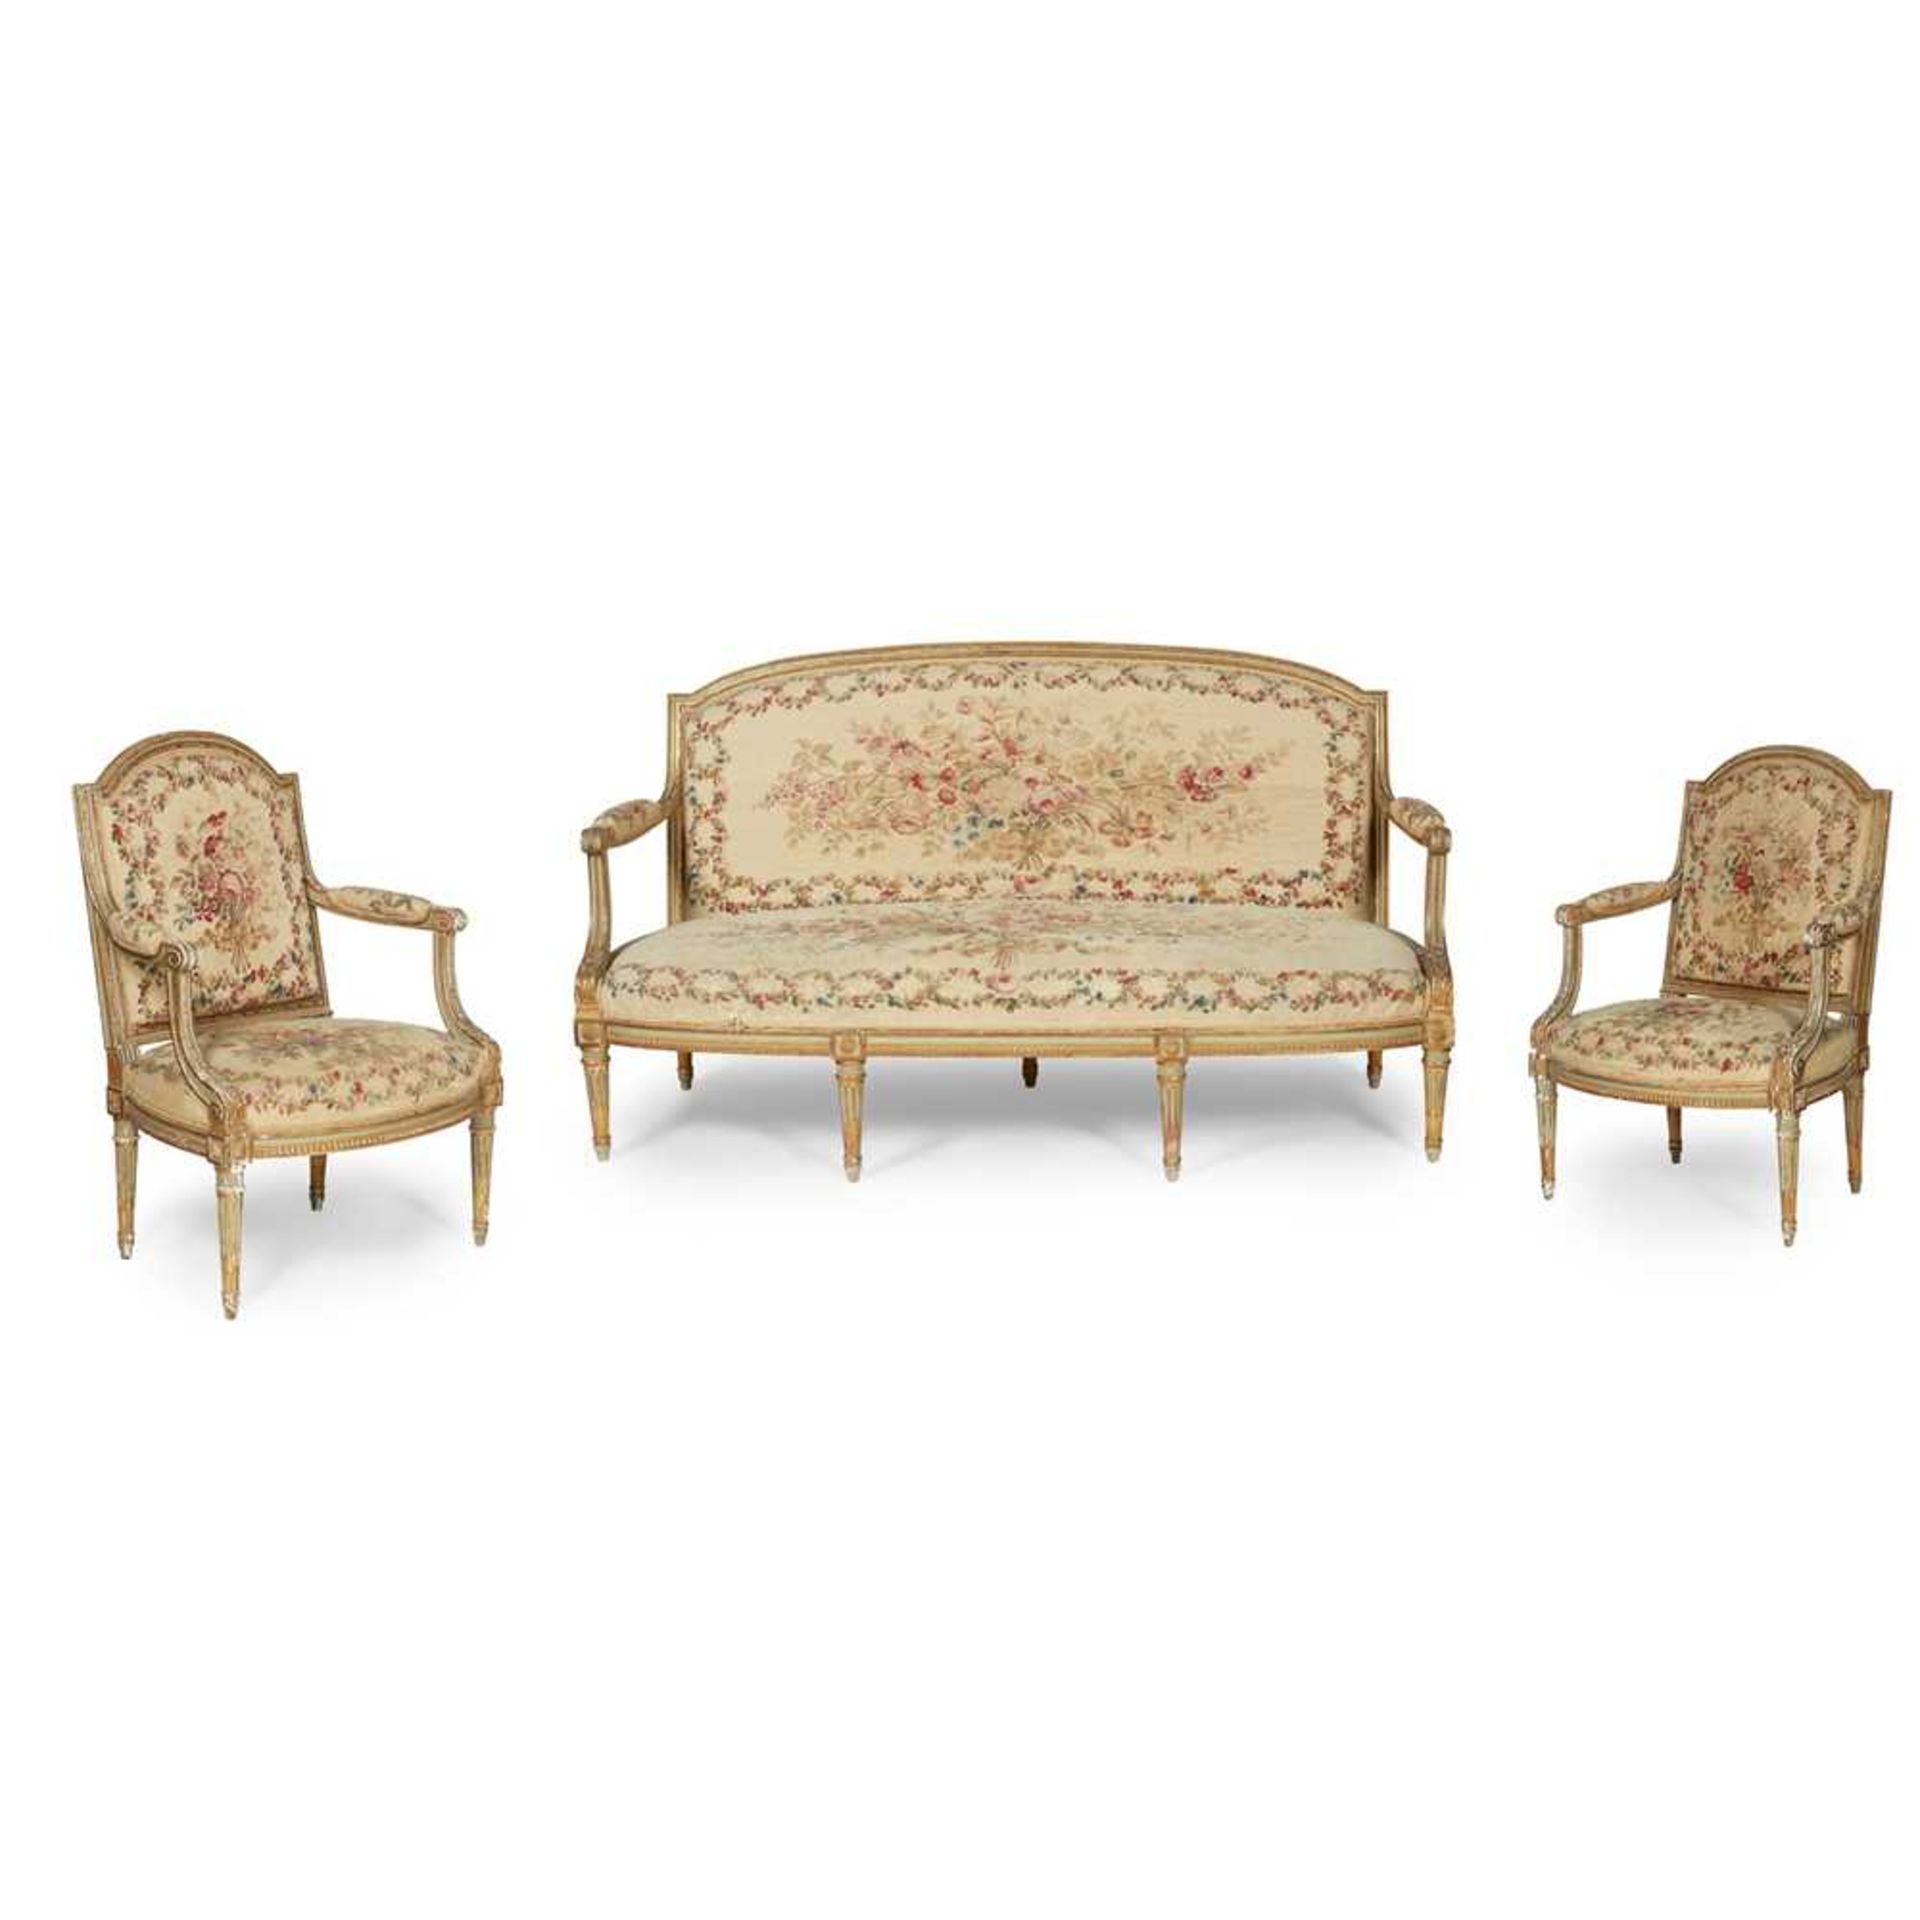 SUITE OF LOUIS XVI GILTWOOD AND AUBUSSON SEAT FURNITURE 19TH CENTURY